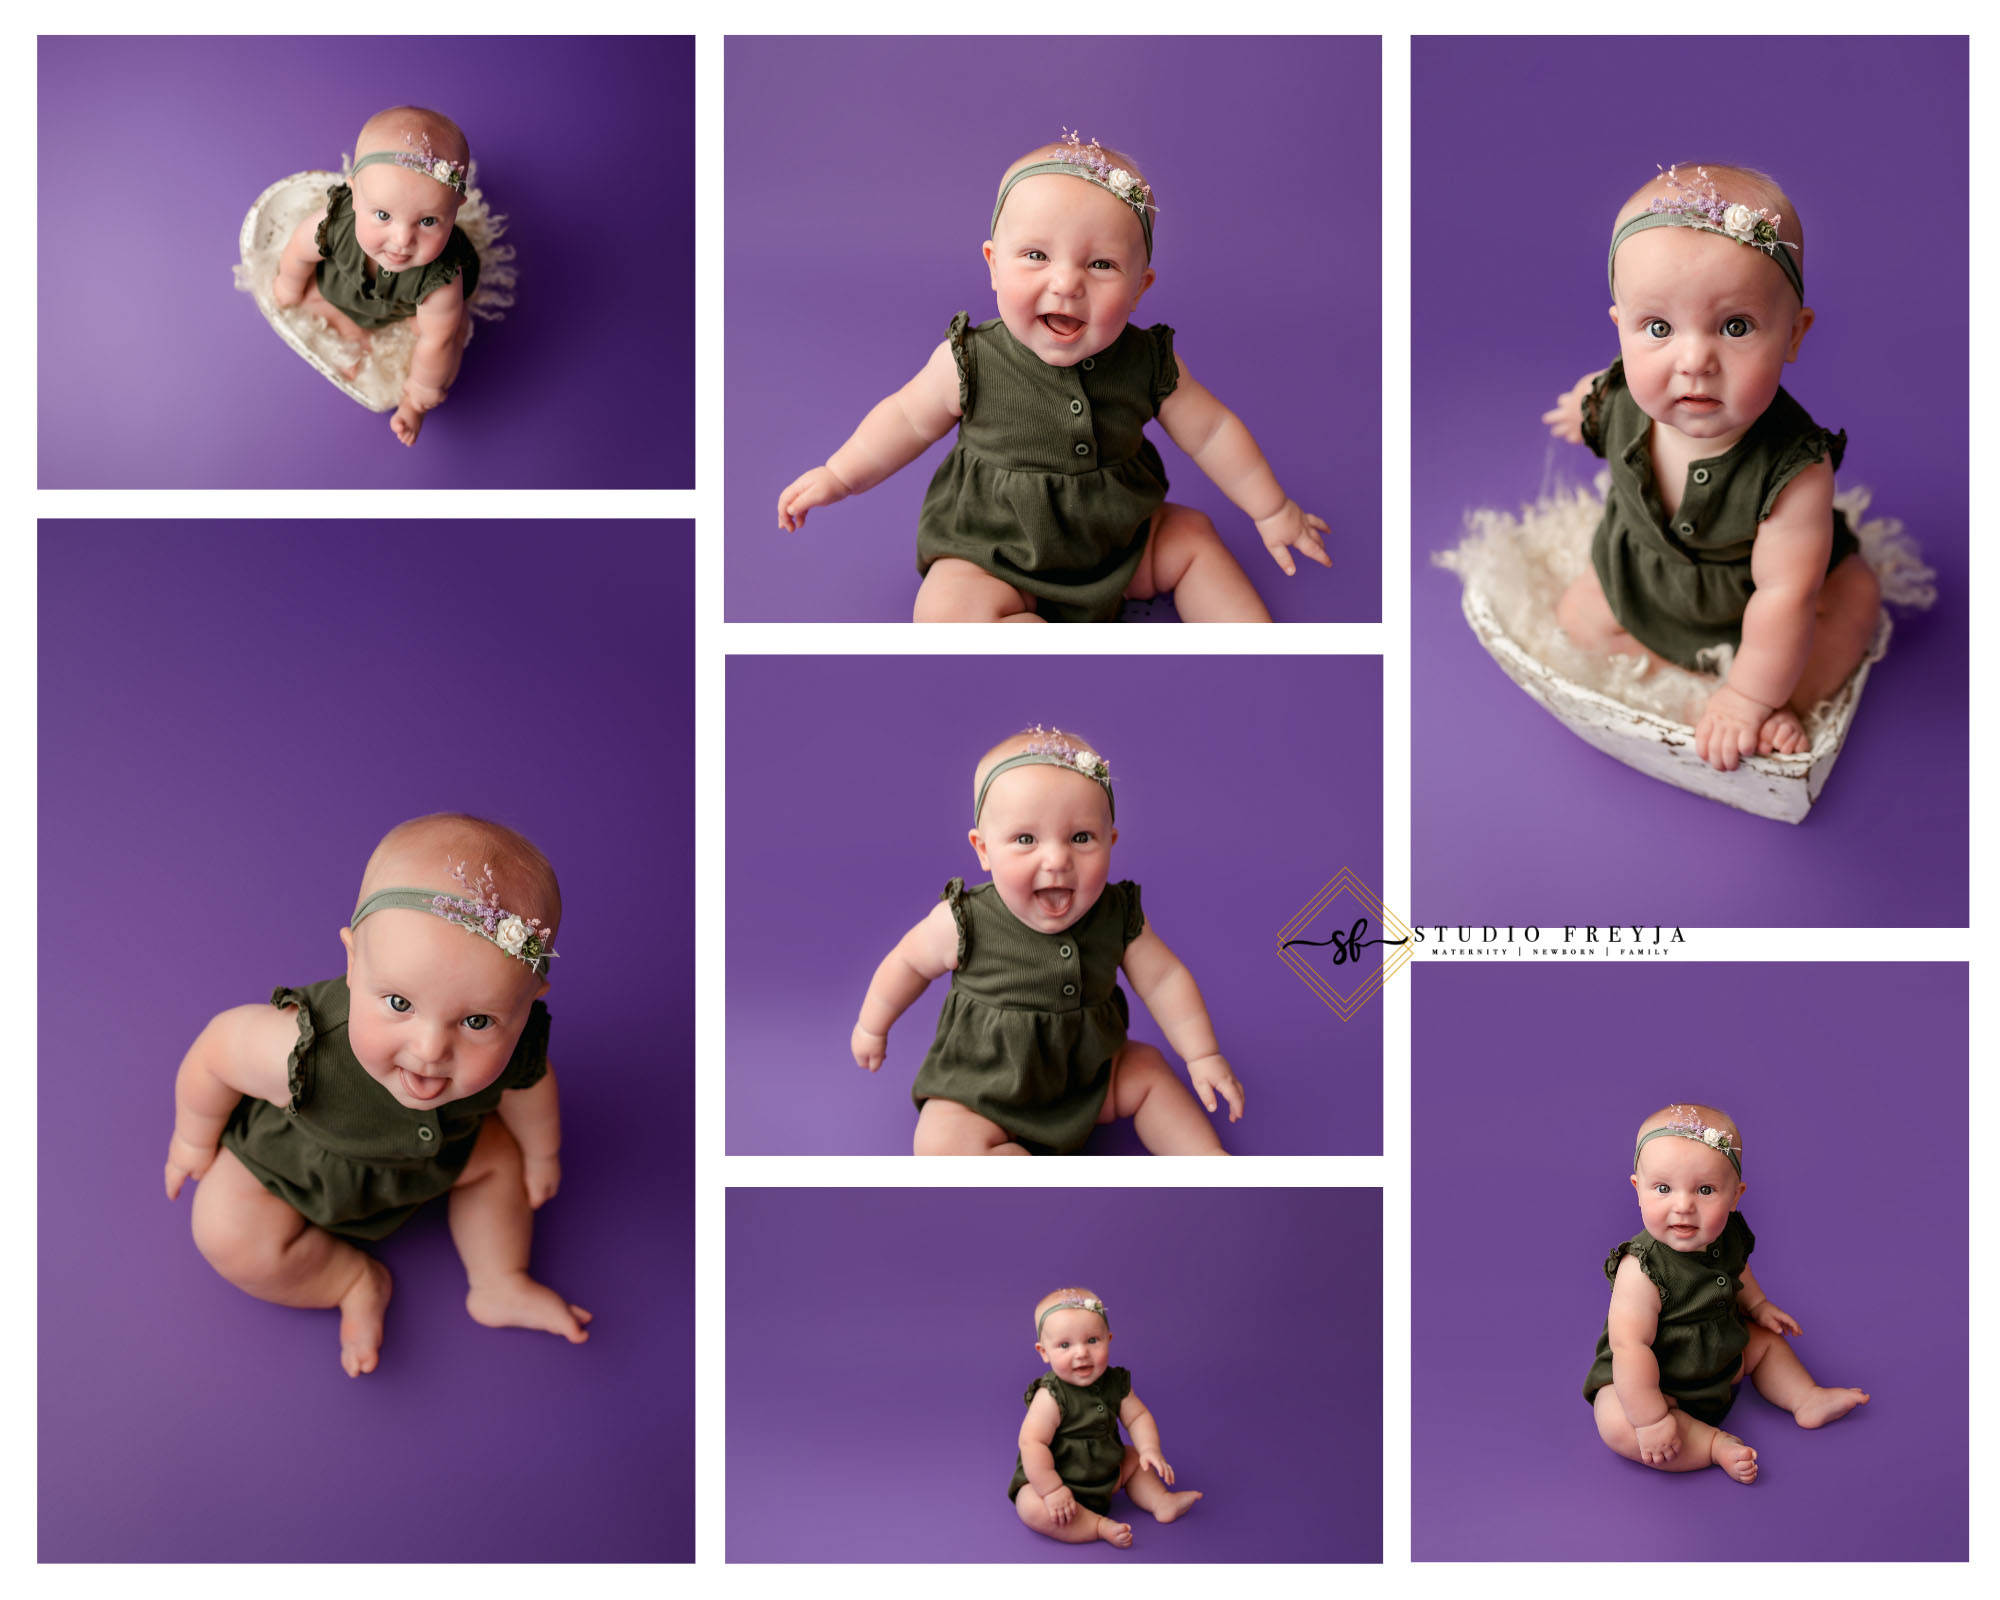 6 month baby girl on purple backdrop with green outfit during her colorful 6 month sitter session pictures